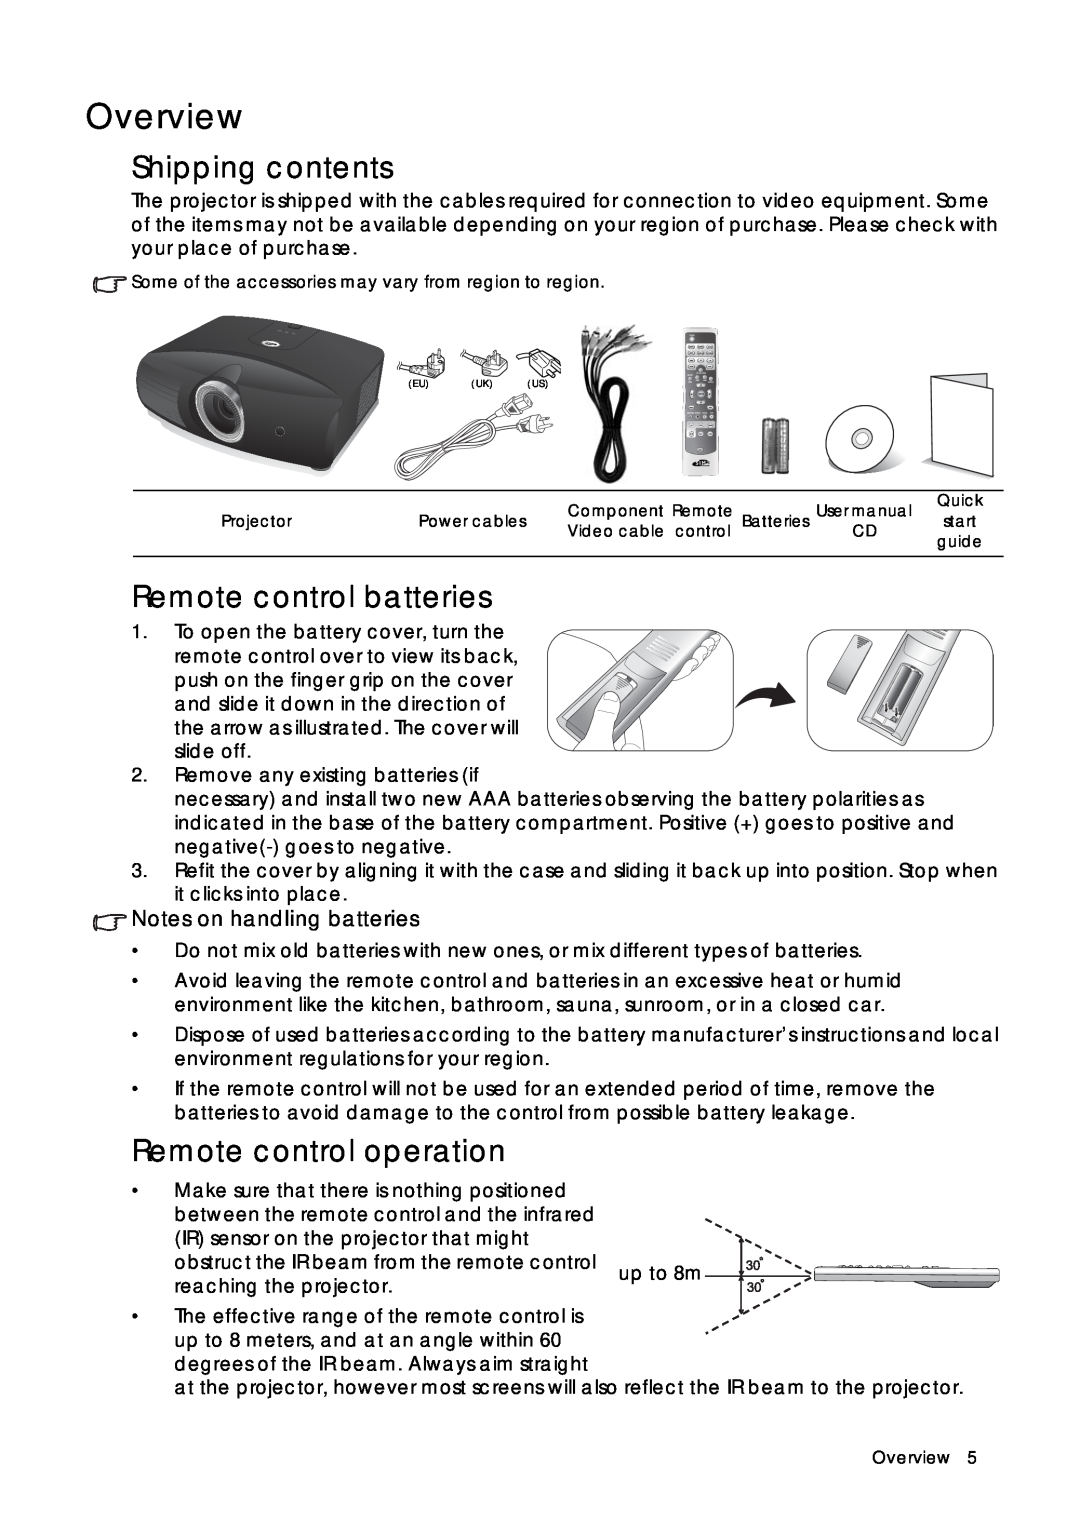 Sim2 Multimedia D60 user manual Overview, Shipping contents, Remote control batteries, Remote control operation 